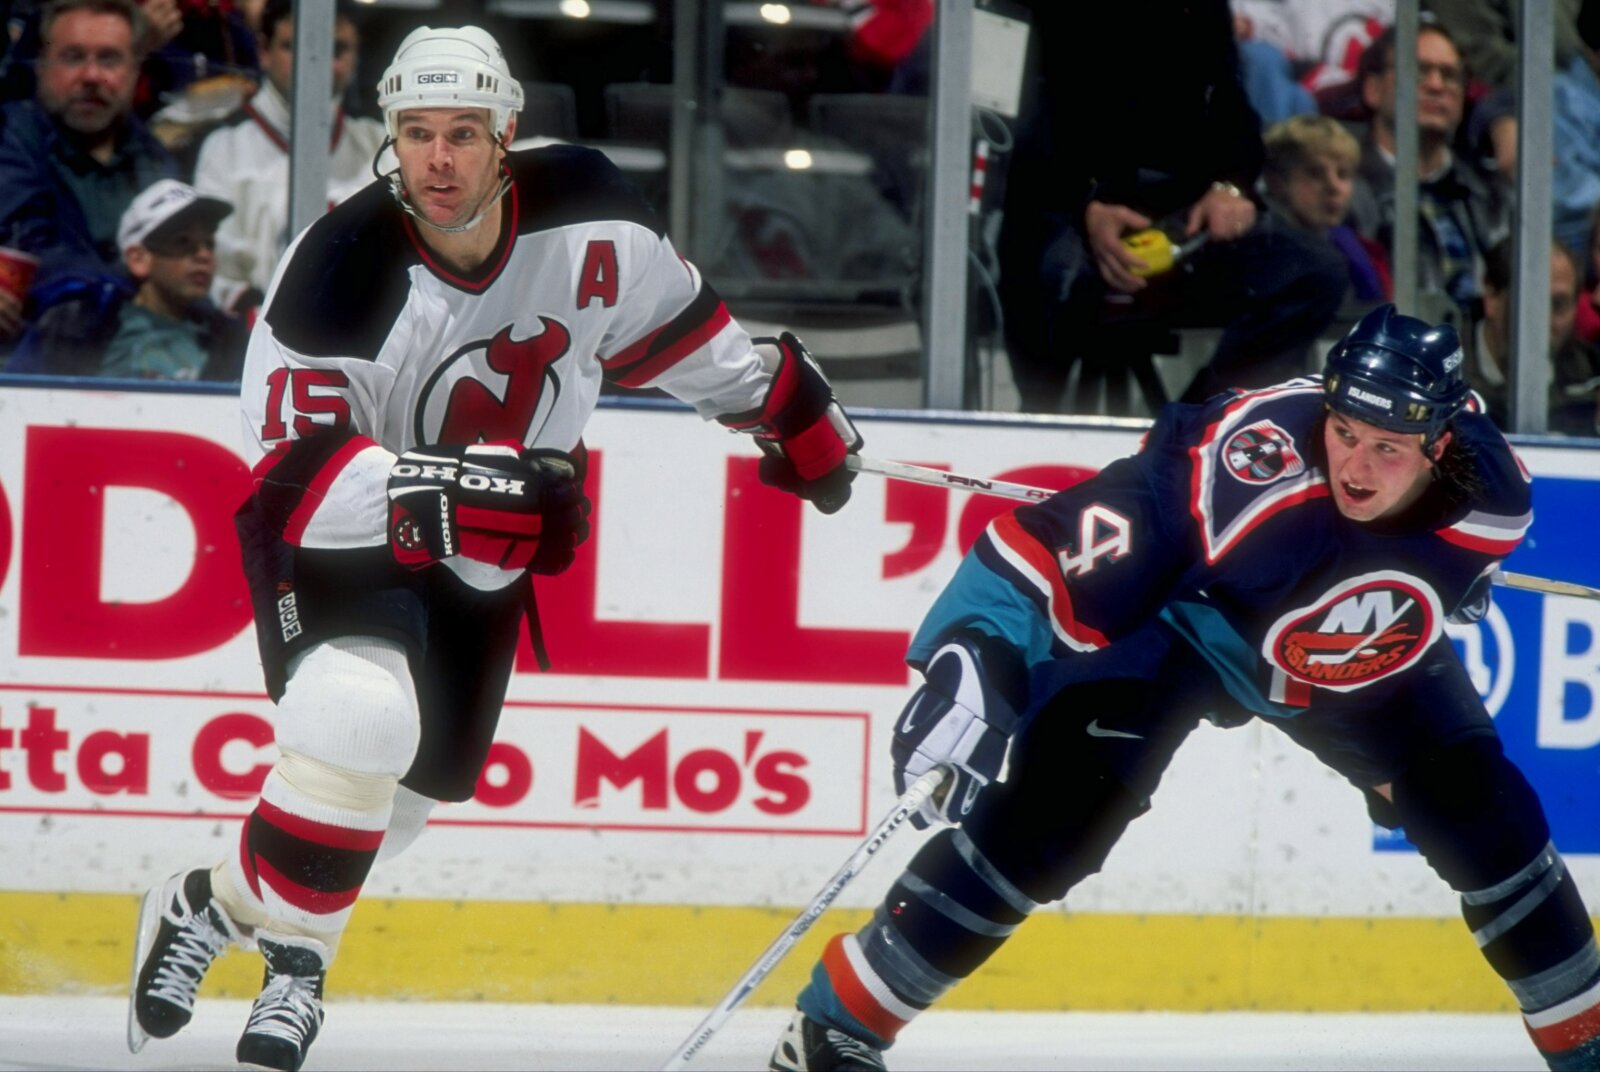 John MacLean: How He Became a New Jersey Devils Legend